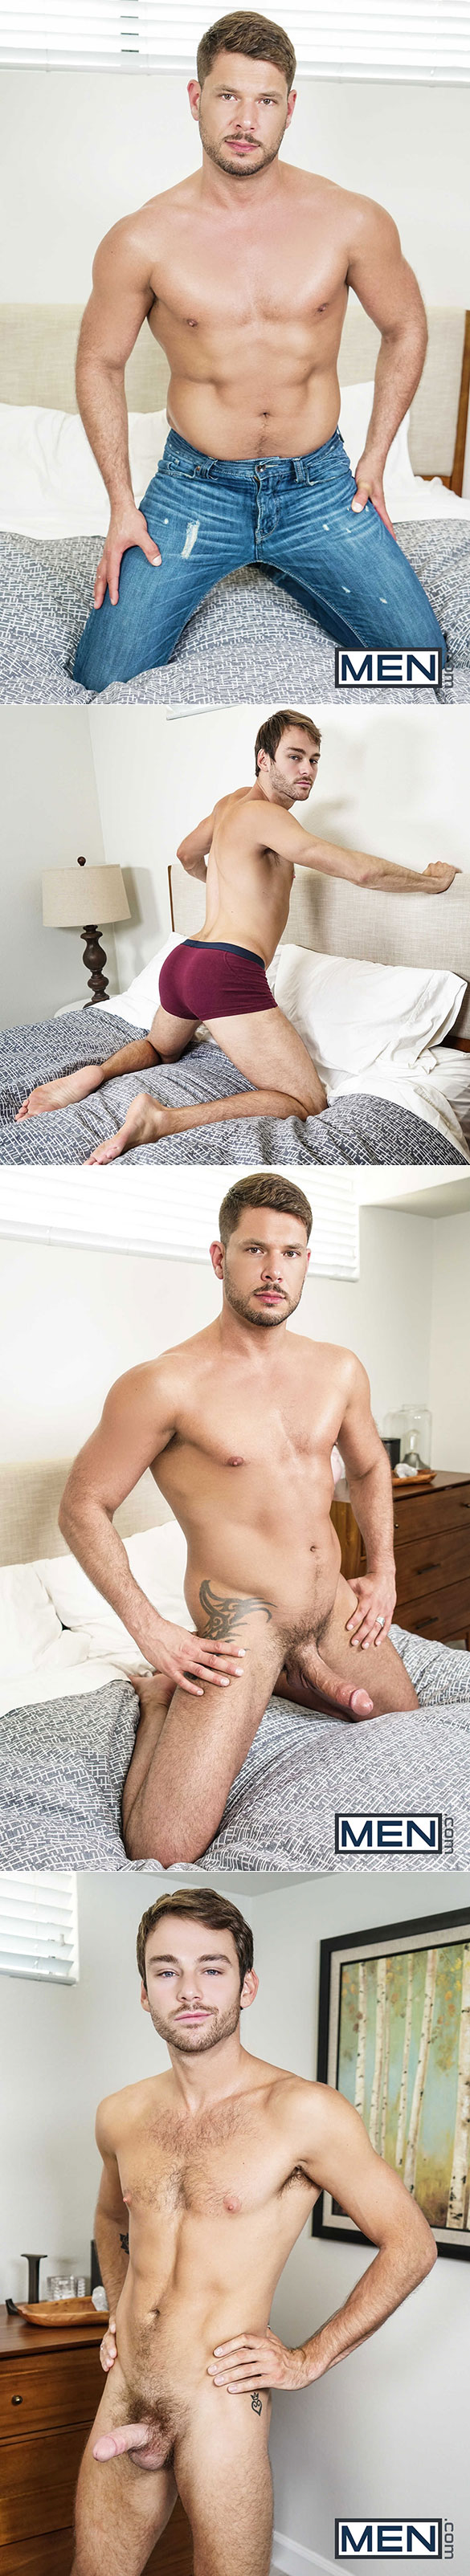 Men.com: Max Adonis takes Tyler Roberts' thick dick in "Don't Wait"